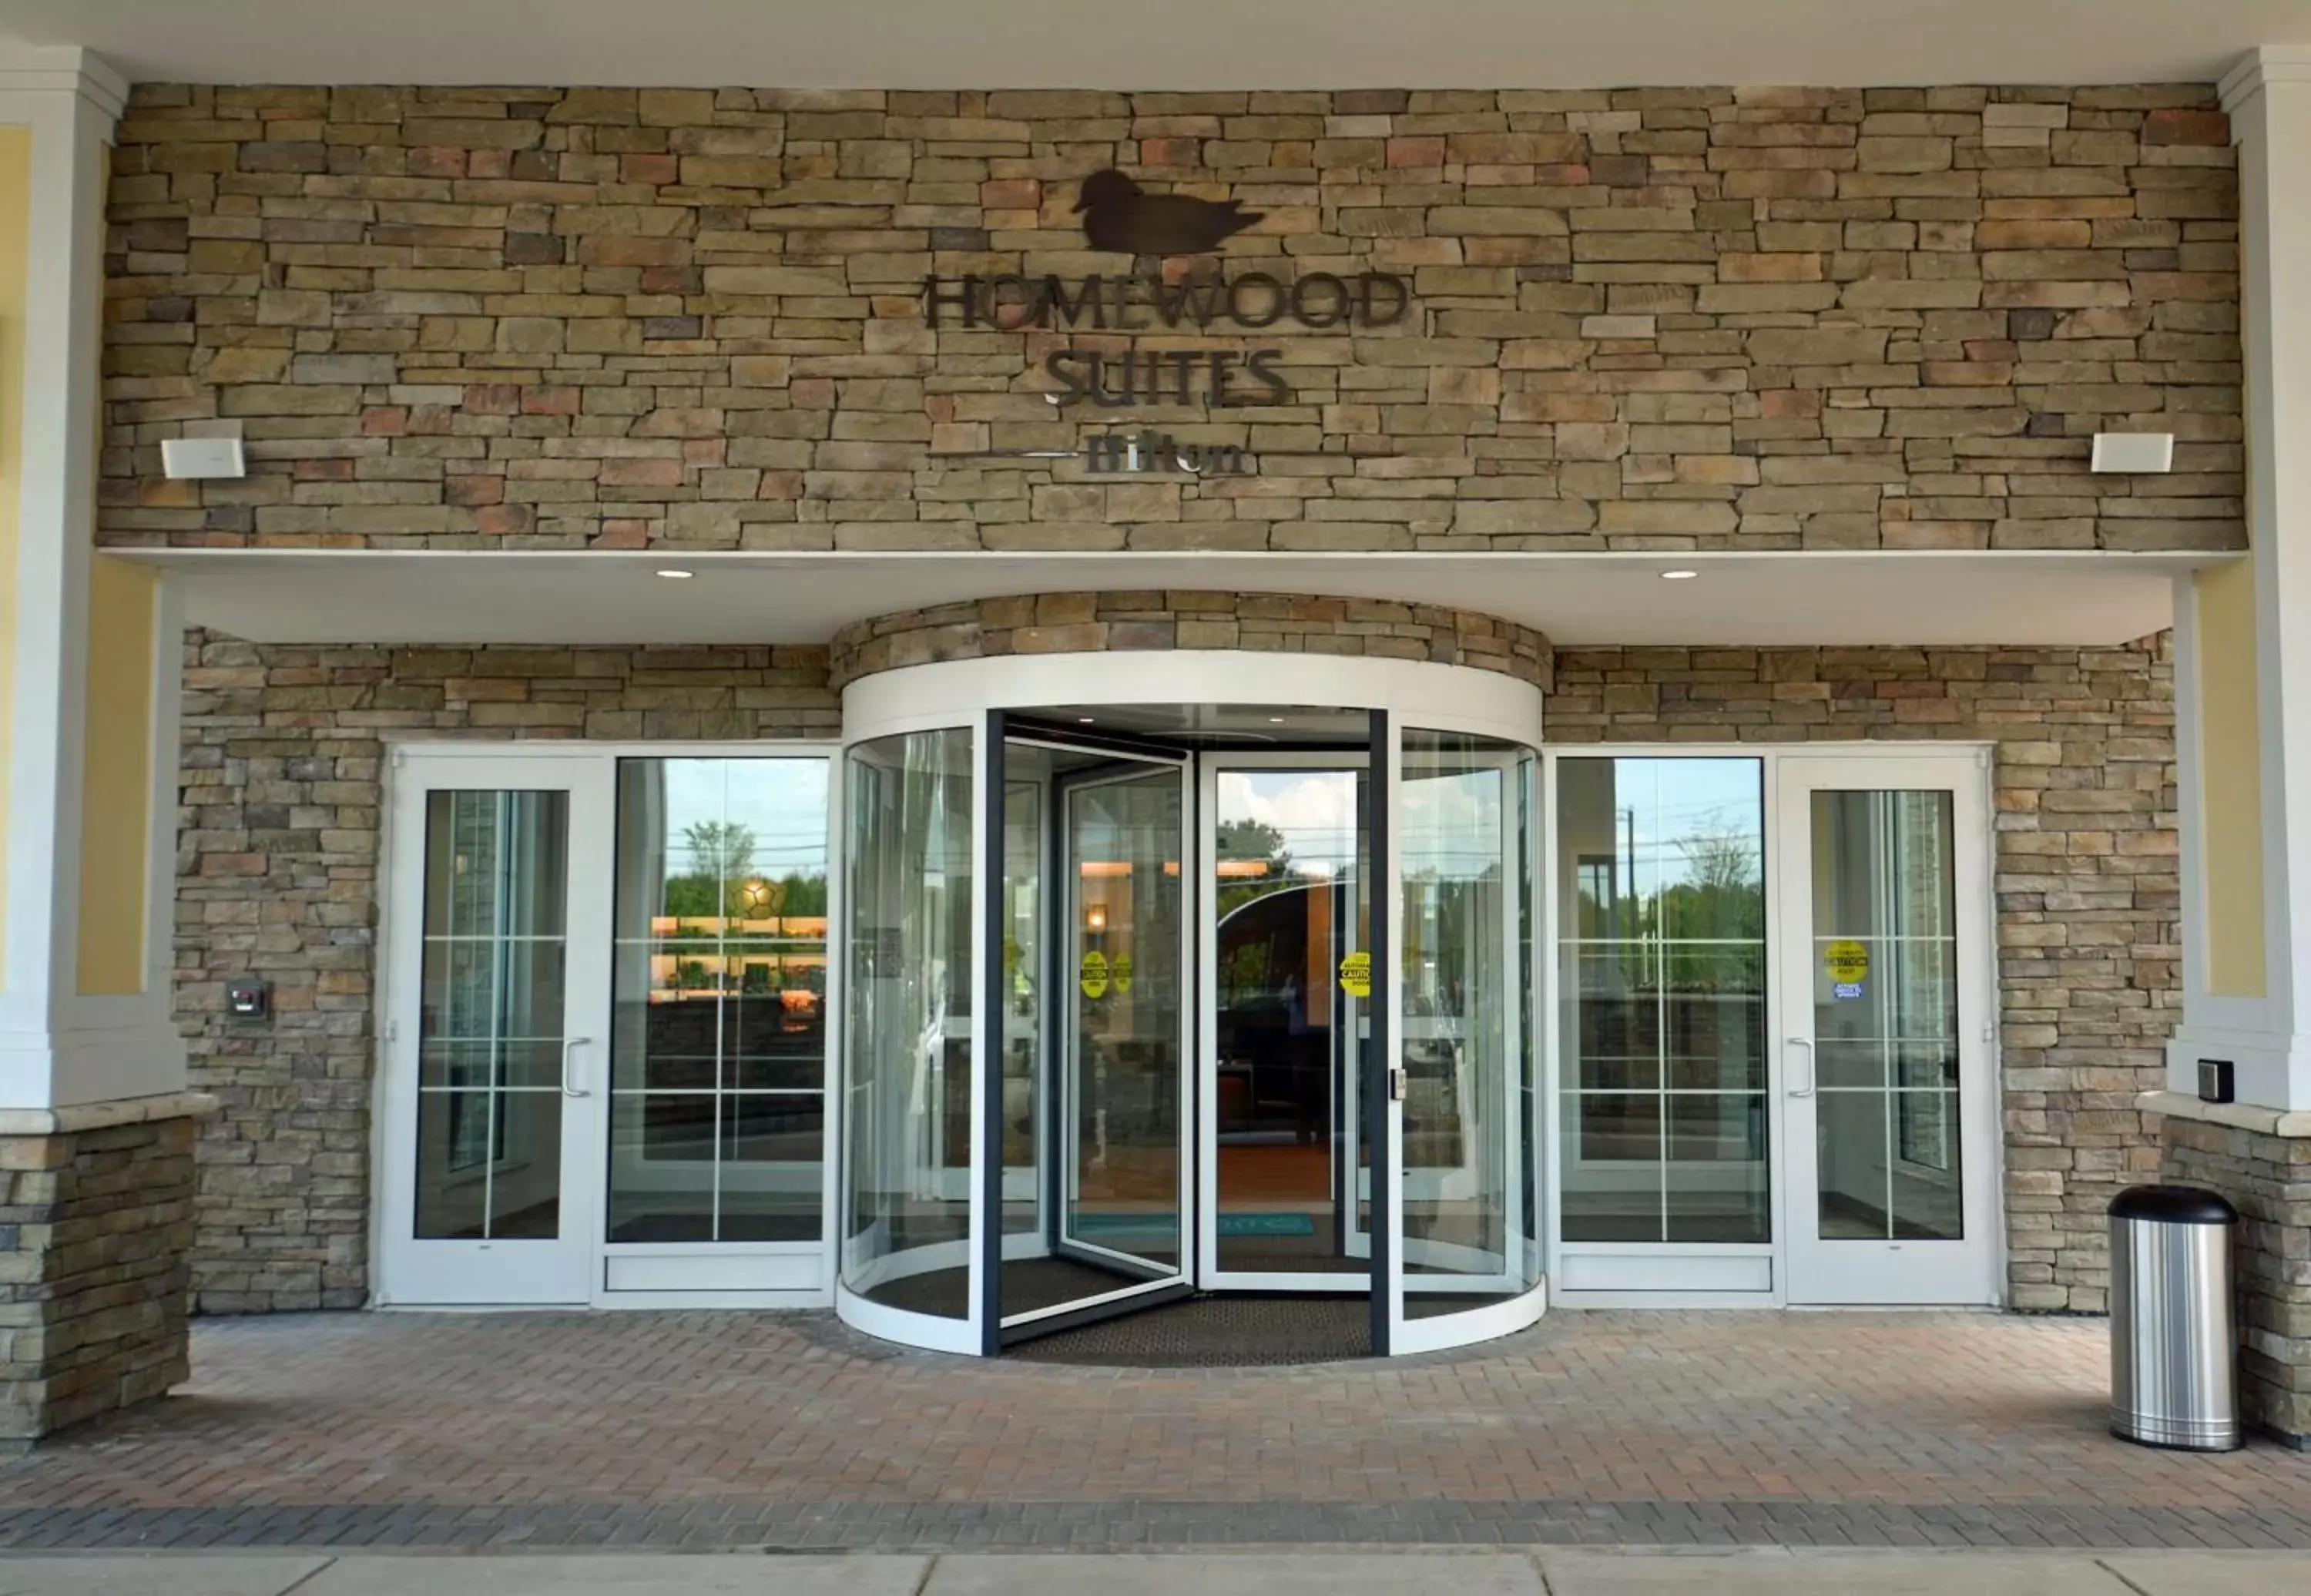 Property building in Homewood Suites By Hilton Saratoga Springs